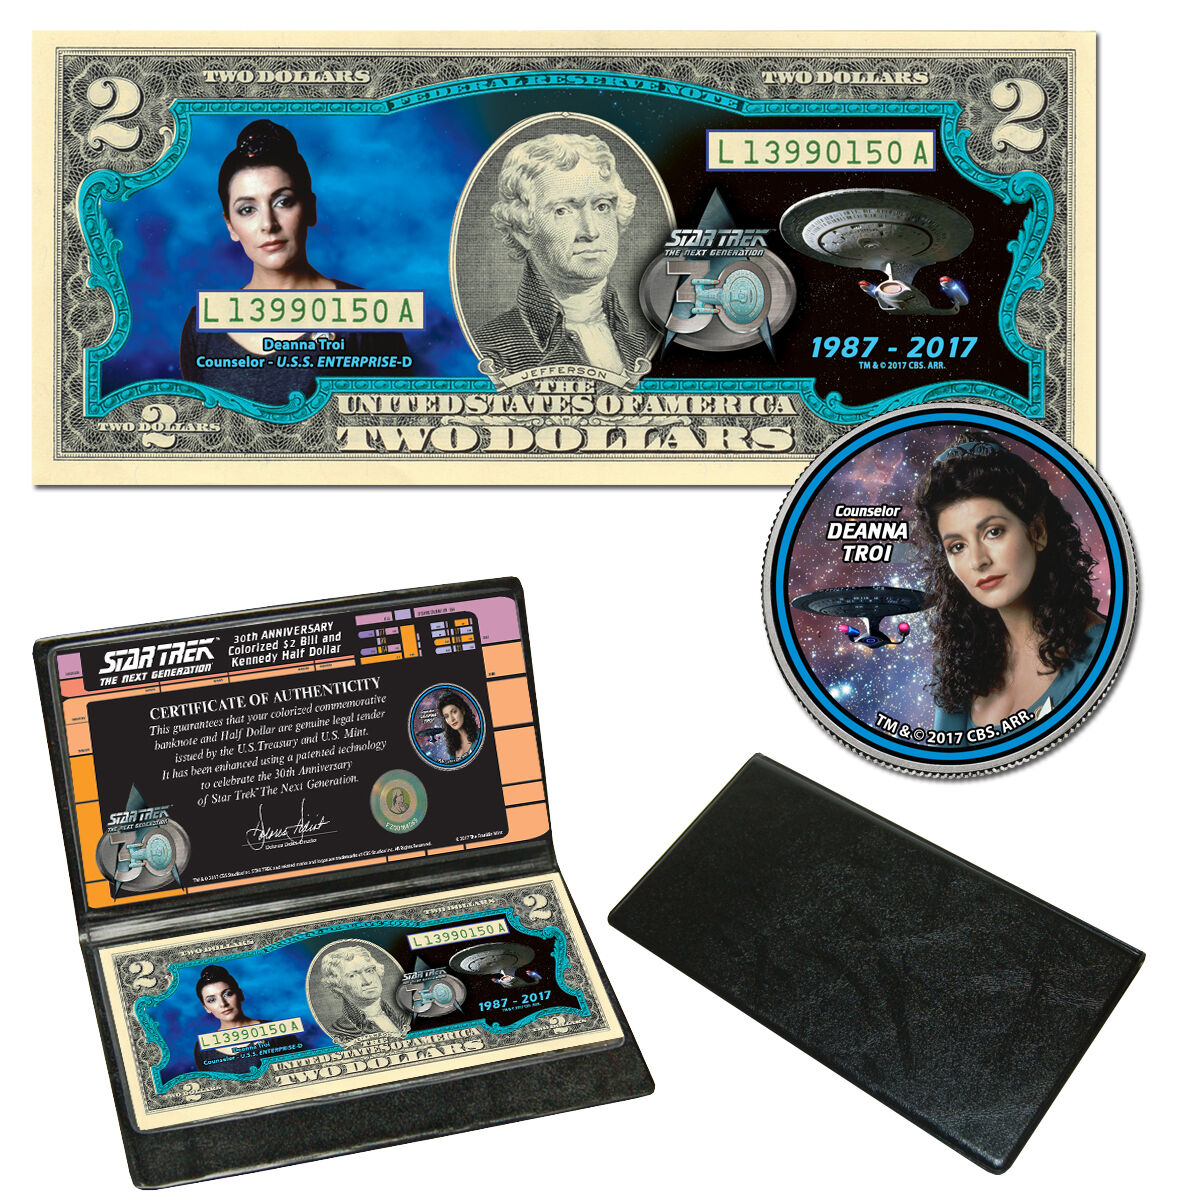  Star Trek: The Next Generation Coin & Currency Collection  - Counselor Troi 